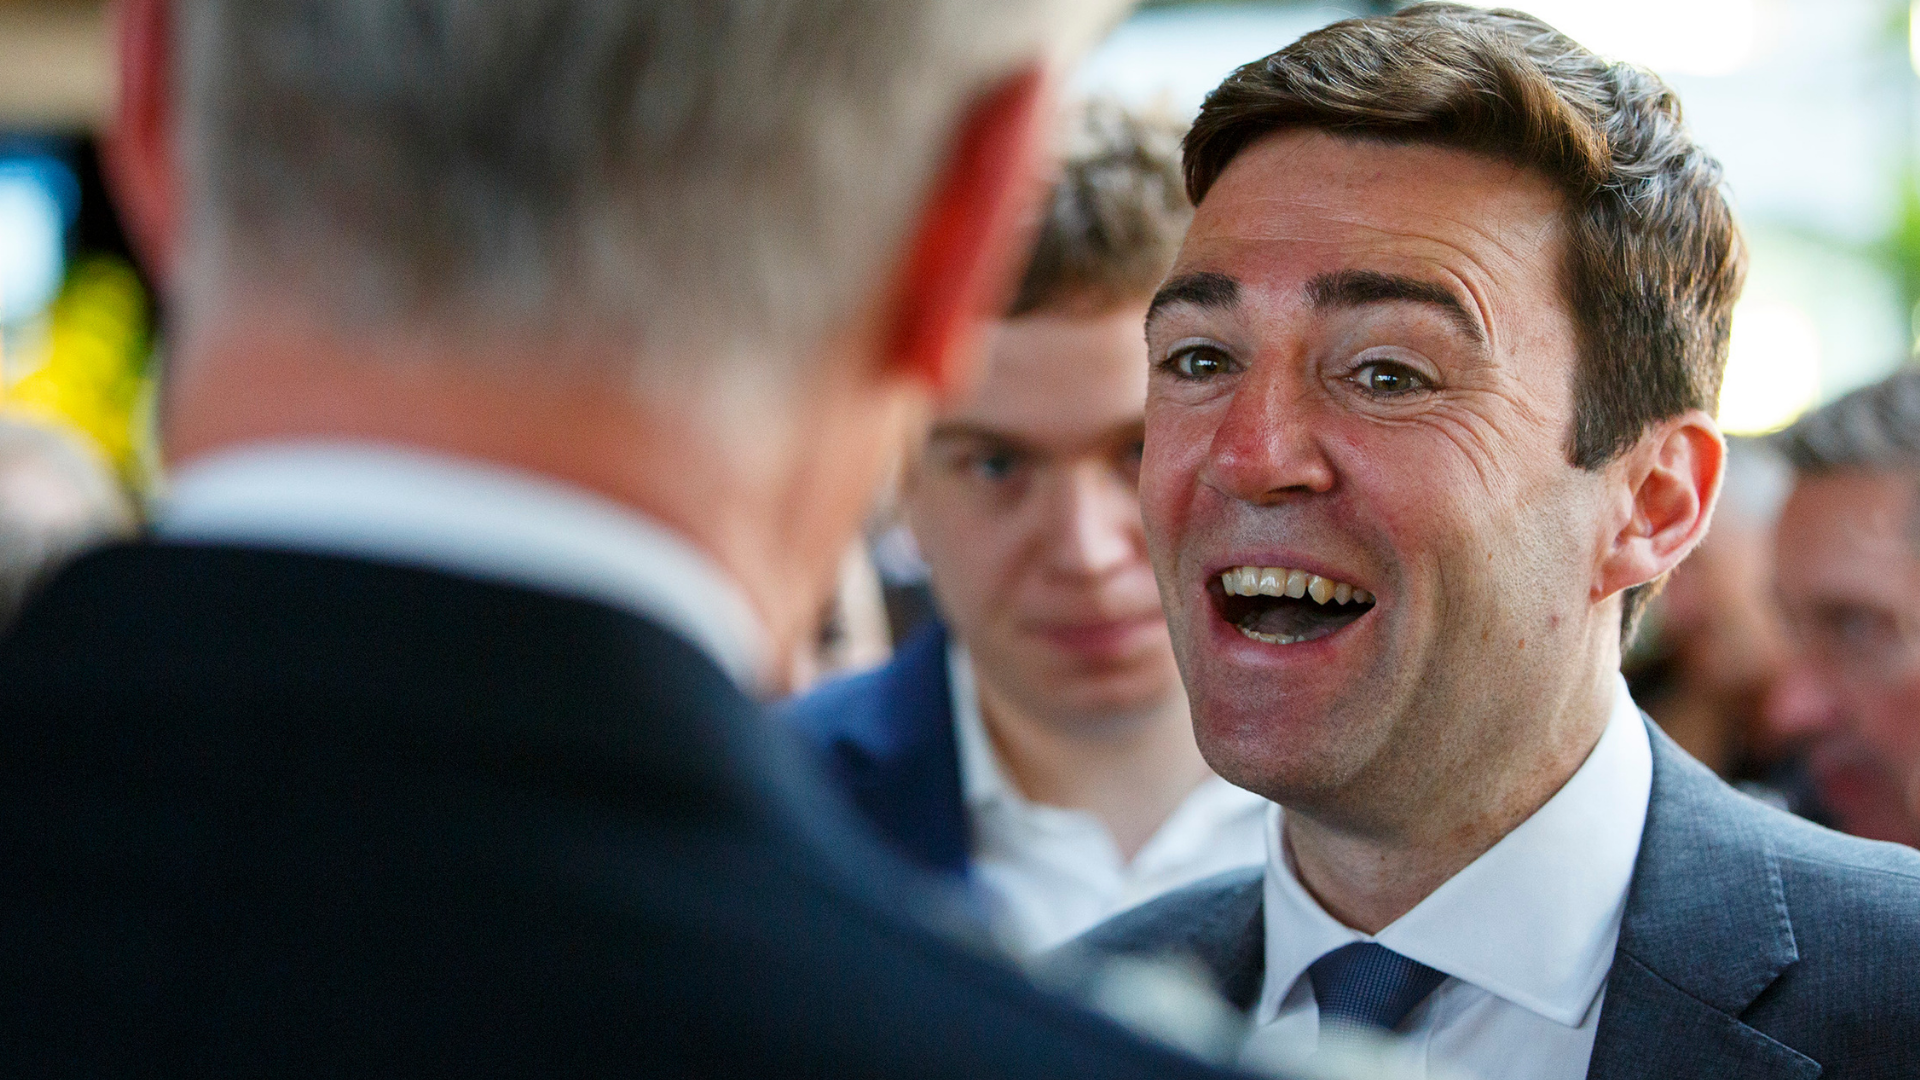 Andy Burnham. Image credit: Financial Times @ Flickr